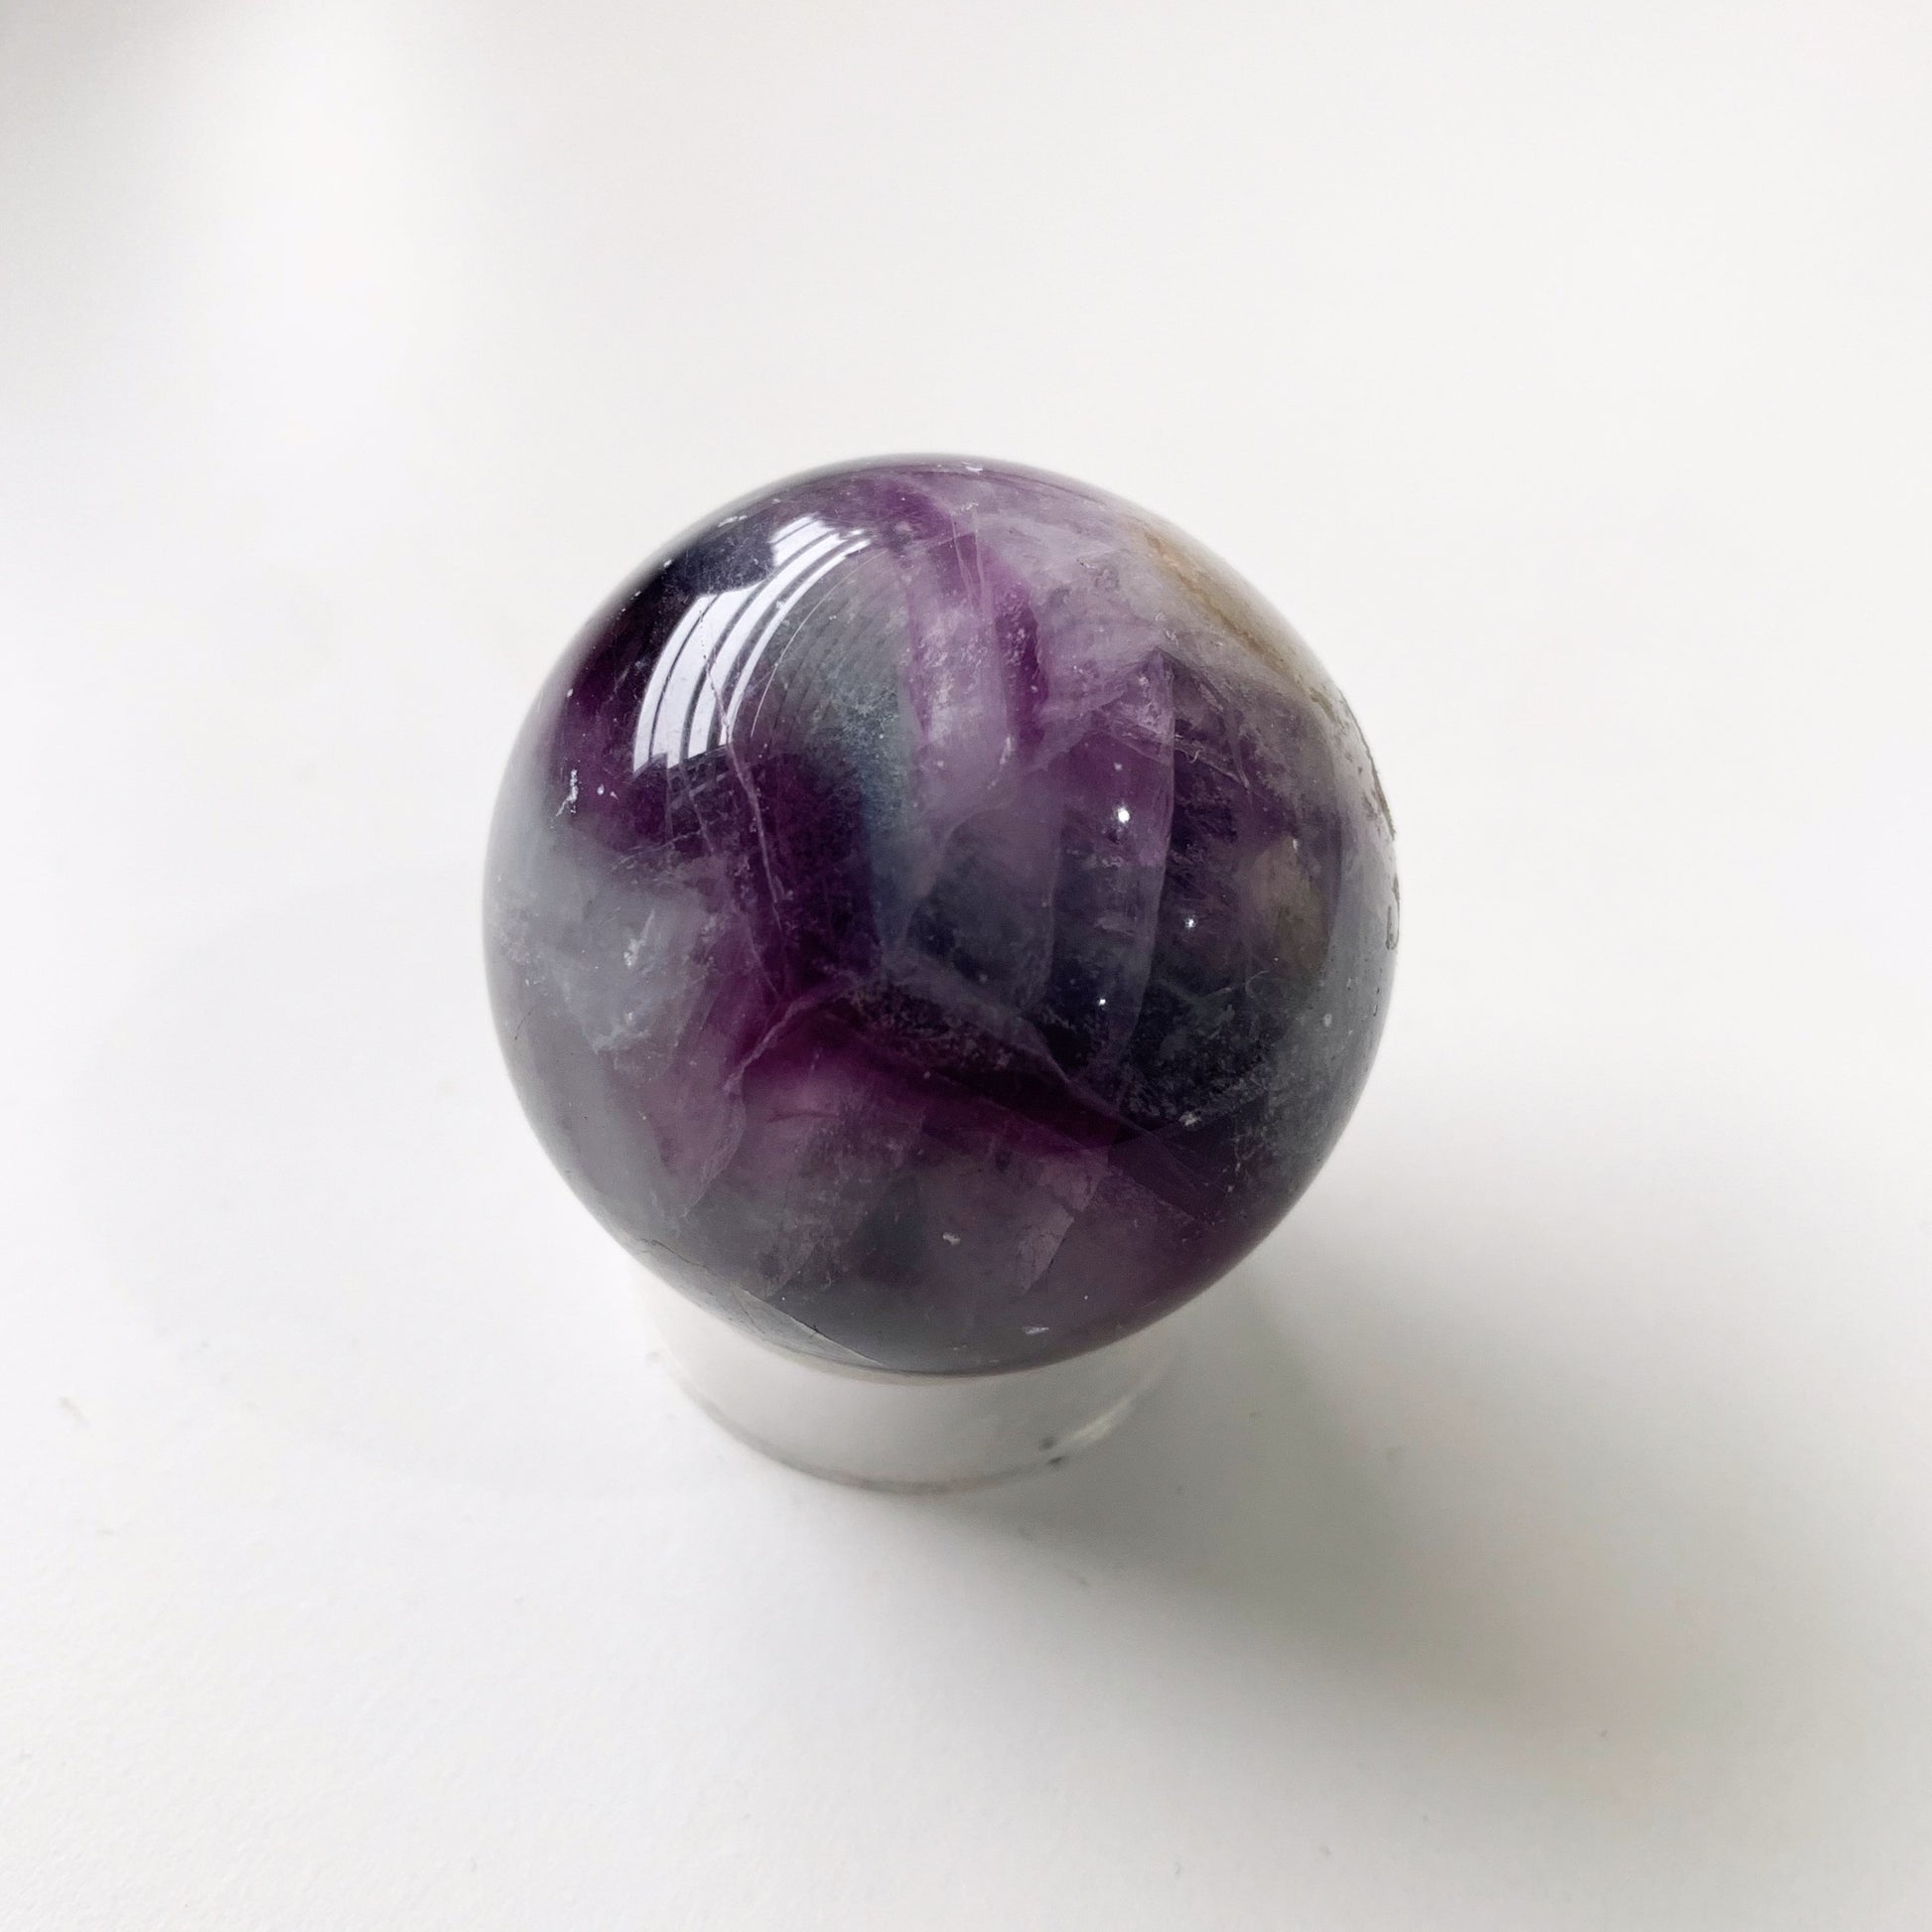 It is an excellent aid in learning and studies as it helps to alleviate chaos and promotes the ability for the mind to absorb and organize information. A highly spiritual stone, Rainbow Fluorite supports spiritual growth, and can accelerate the process of developing intuition.  Approx 40mm diameter